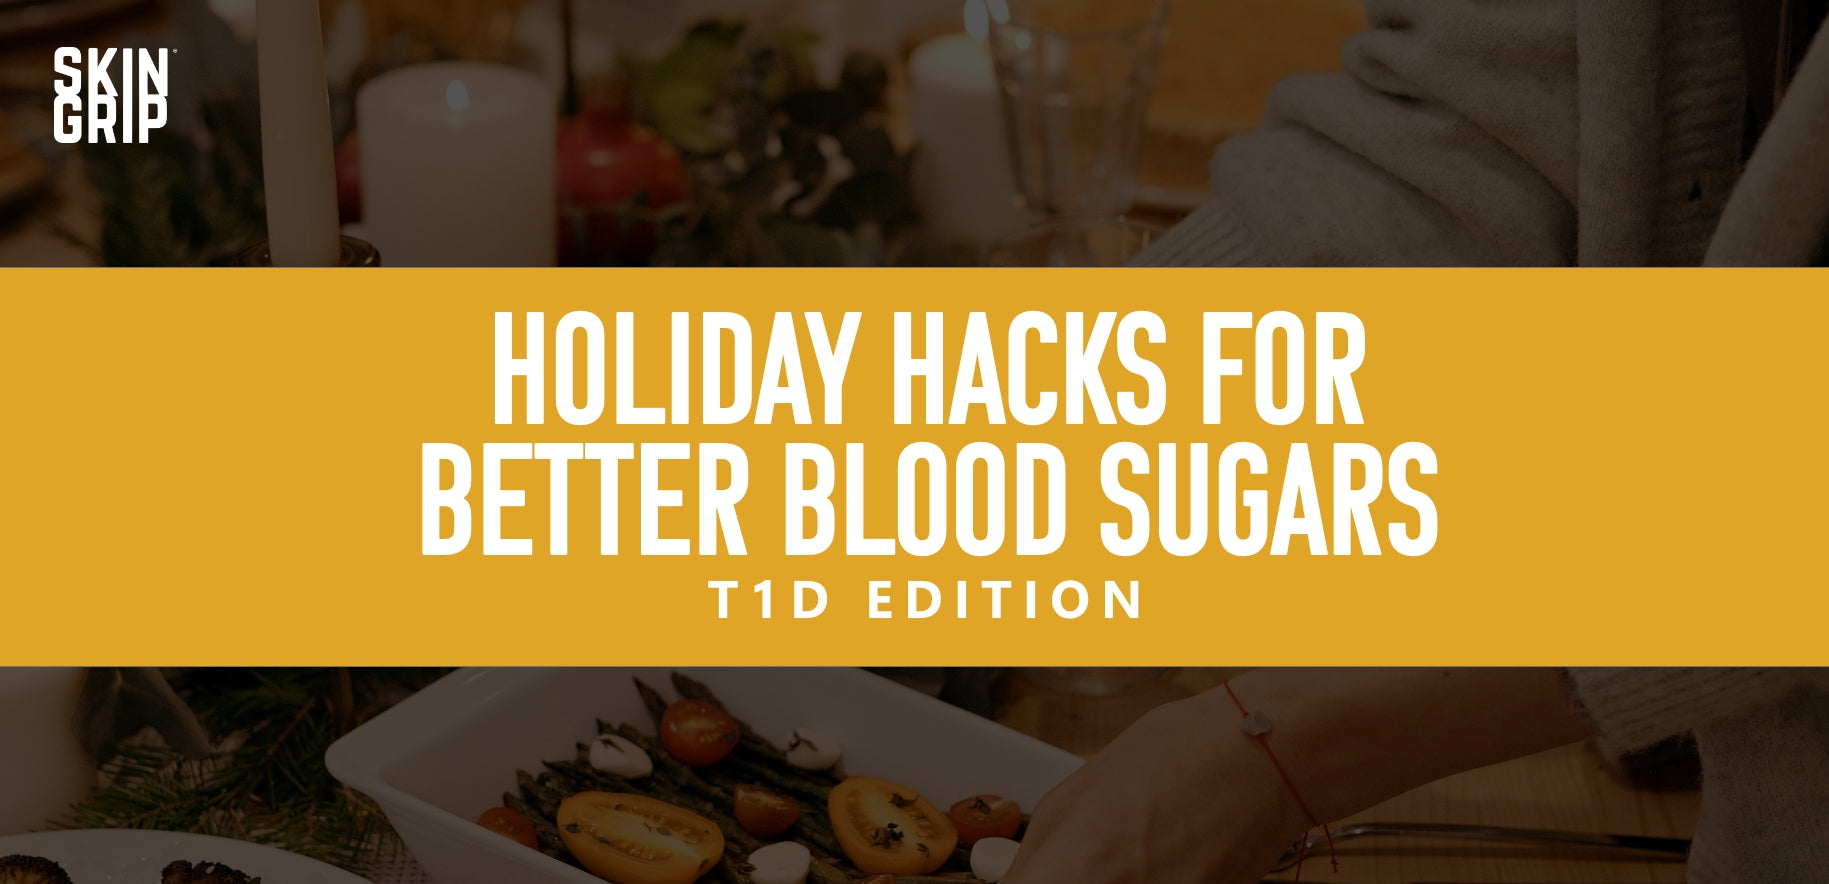 Holiday Hacks for Better Blood Sugars: Type 1 Diabetes Edition